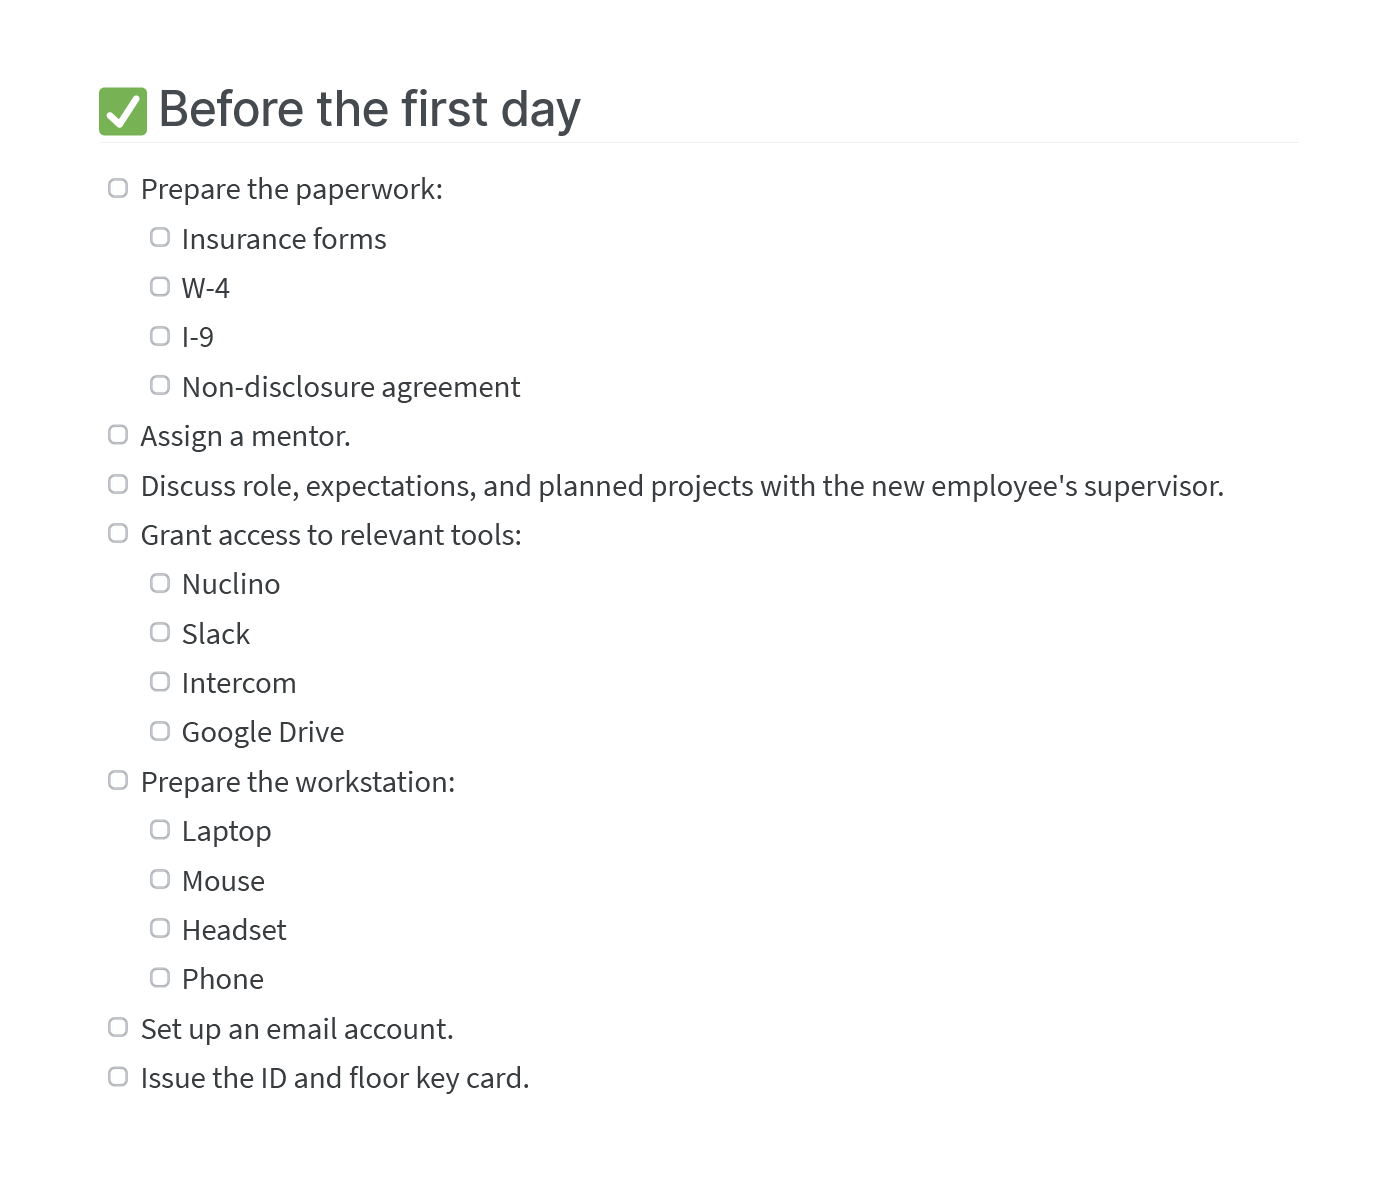 New employee onboarding checklist example, before the first day